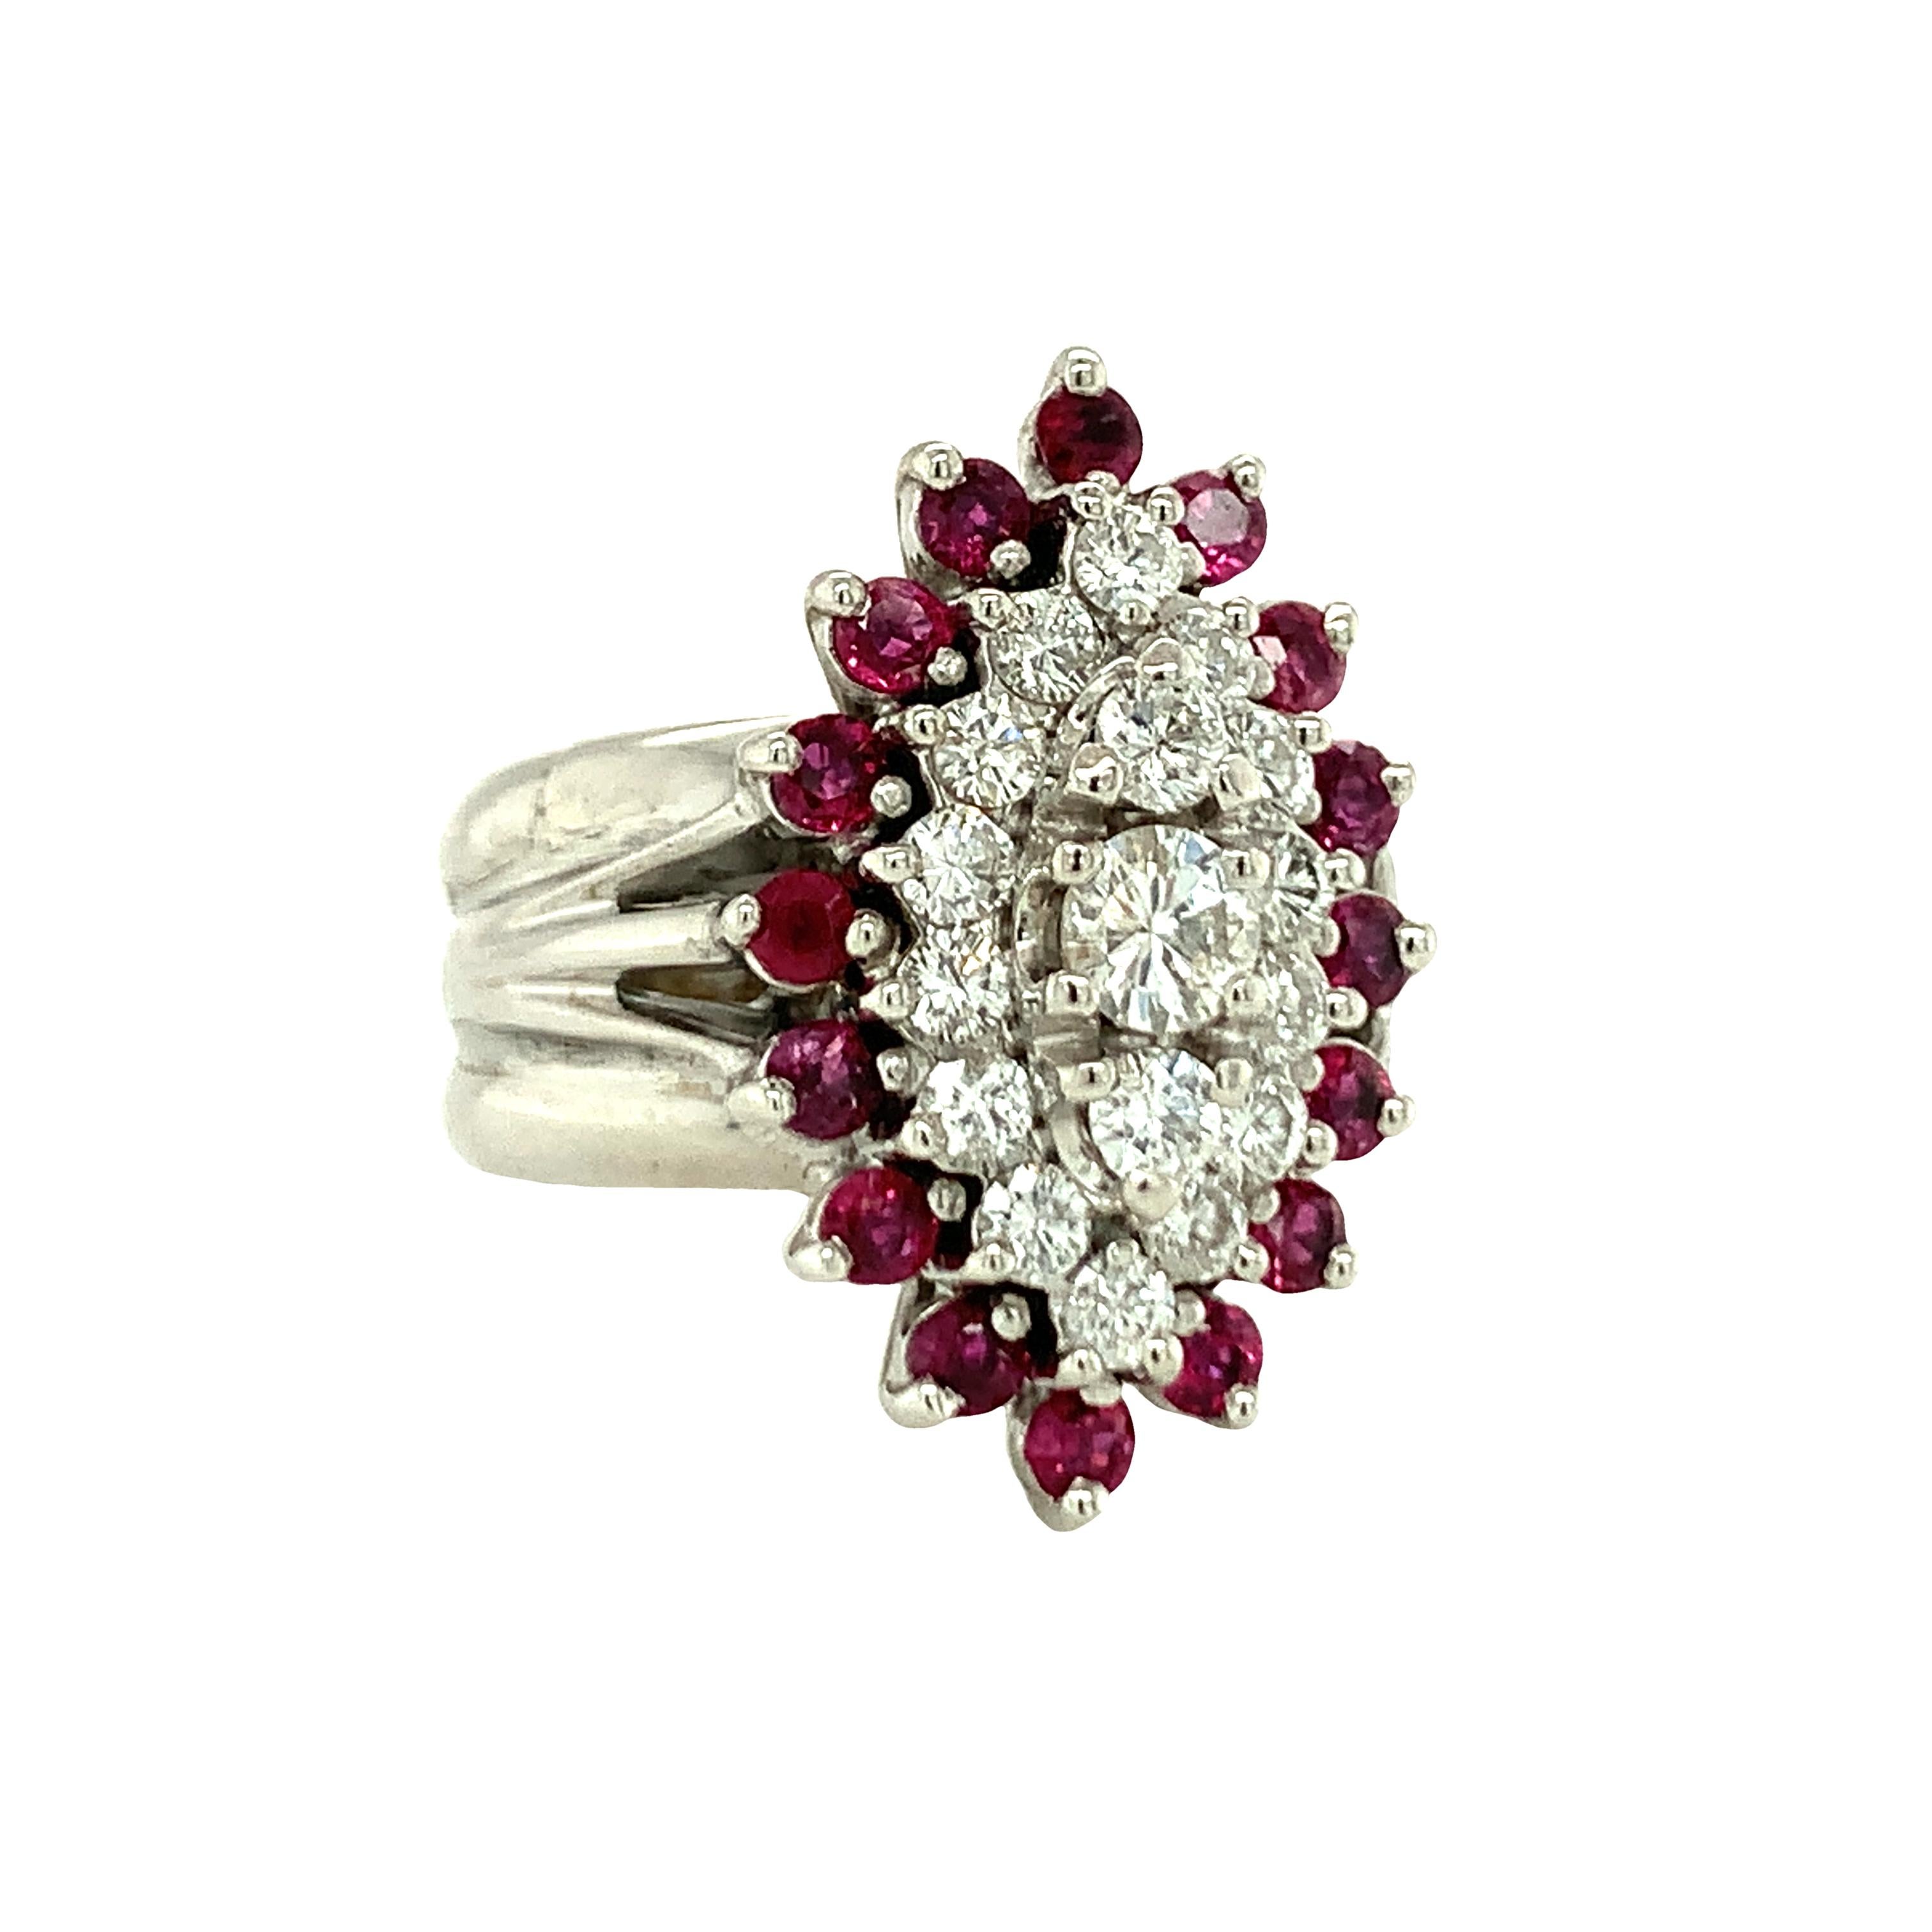 One 14K white gold marquise shaped diamond and ruby cluster ring featuring 17 round brilliant cut diamonds totaling 0.94 ct. with I-J color and SI-2 clarity.  Also featuring 16 round brilliant cut rubies totaling 0.64 ct. Measures 25 mm. long across